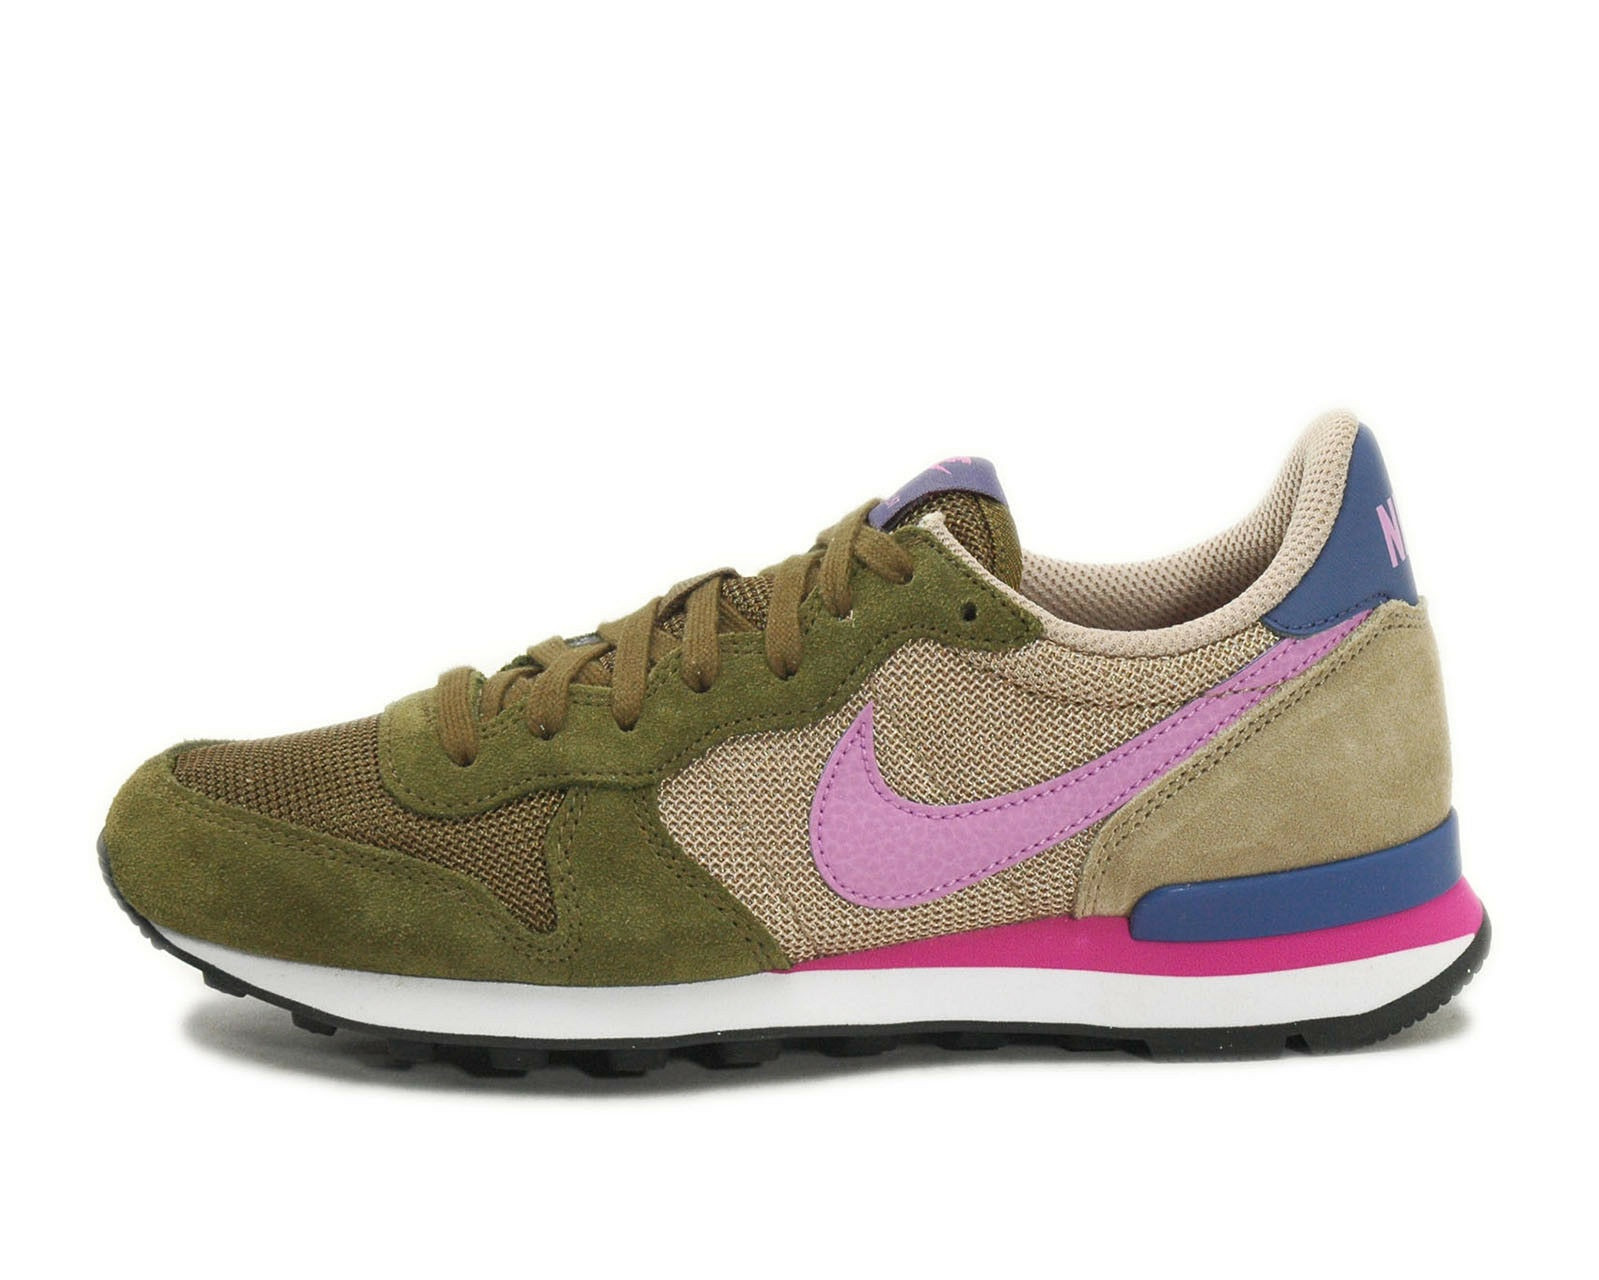 Nike Womens Internationalist Green Purple Womens Shoes 629684 - and sandals that tie her getups together - GmarShops -